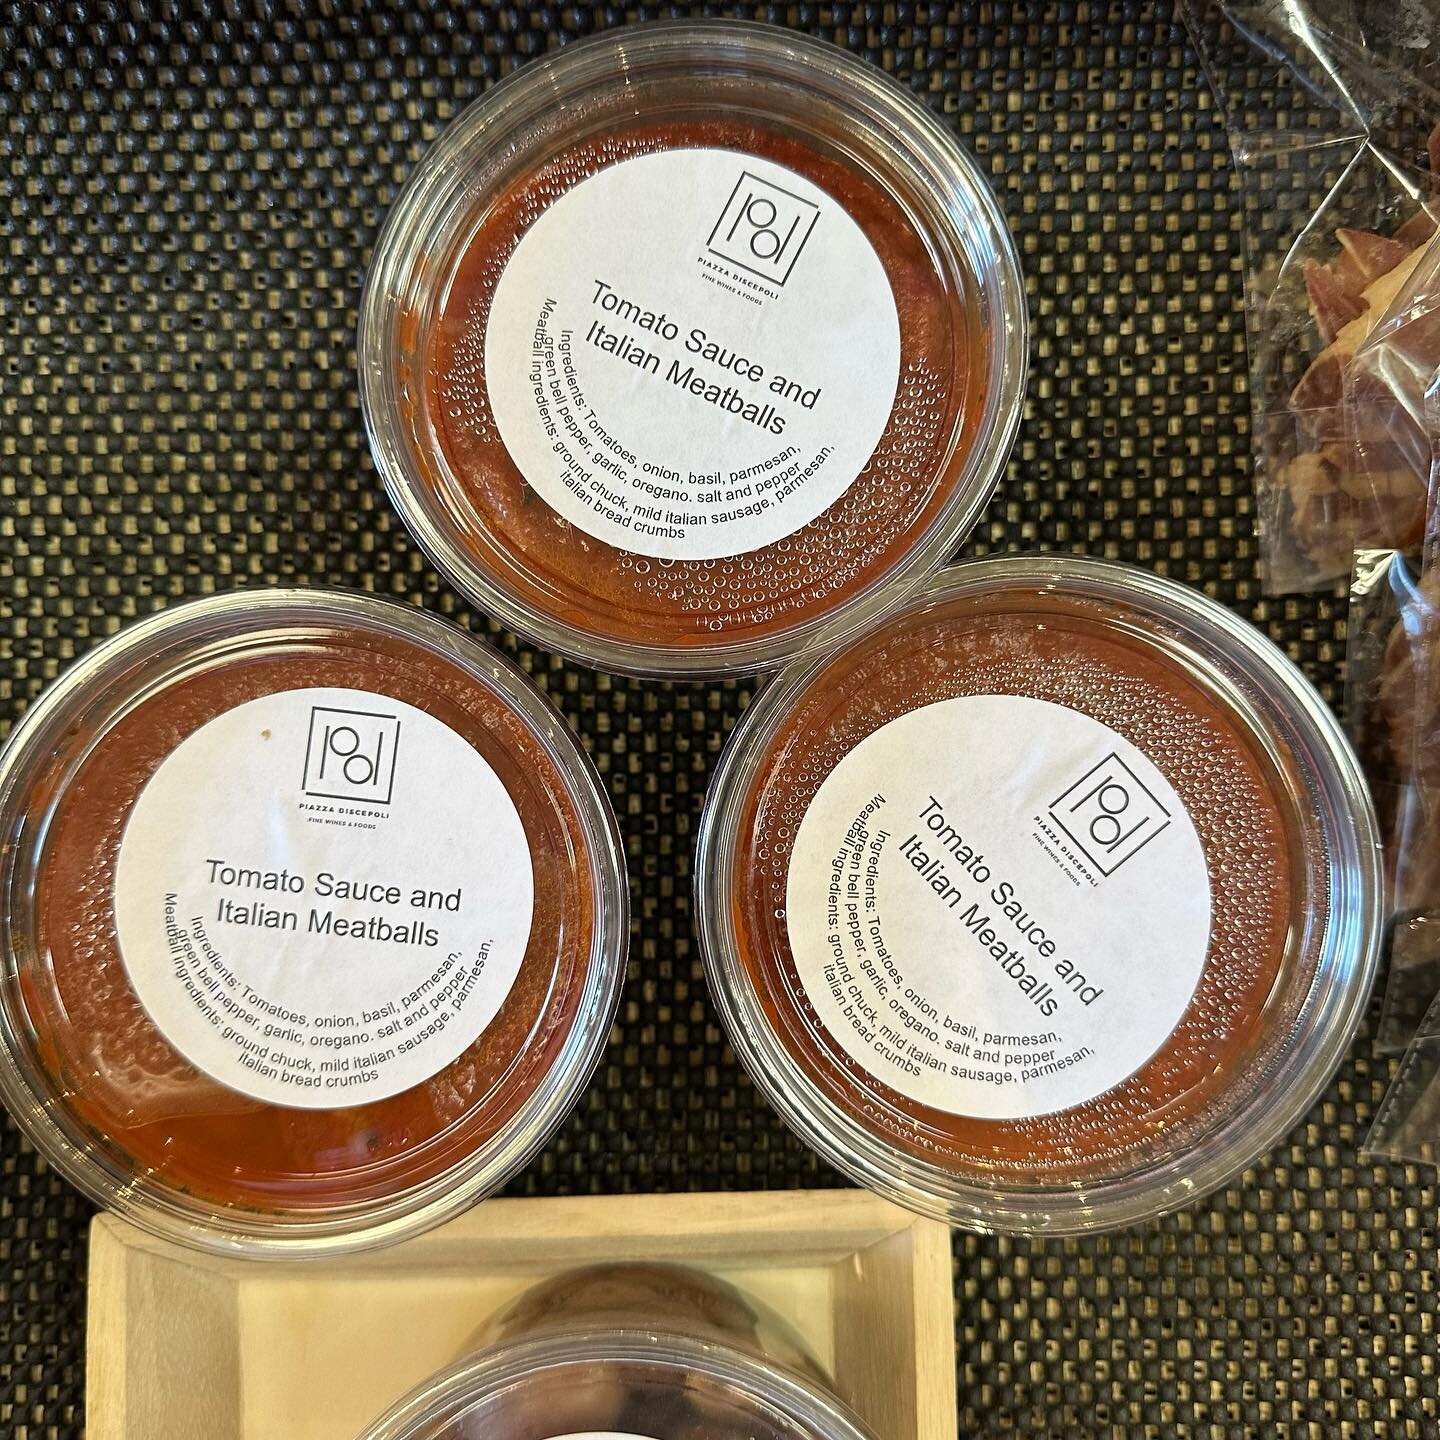 Who doesn&rsquo;t love homemade meatballs and marinara!? They&rsquo;re a new staple around here. Try it with our fresh pasta from @ohiocitypasta !! #local #foodie #food #ohio #italian #italianfood